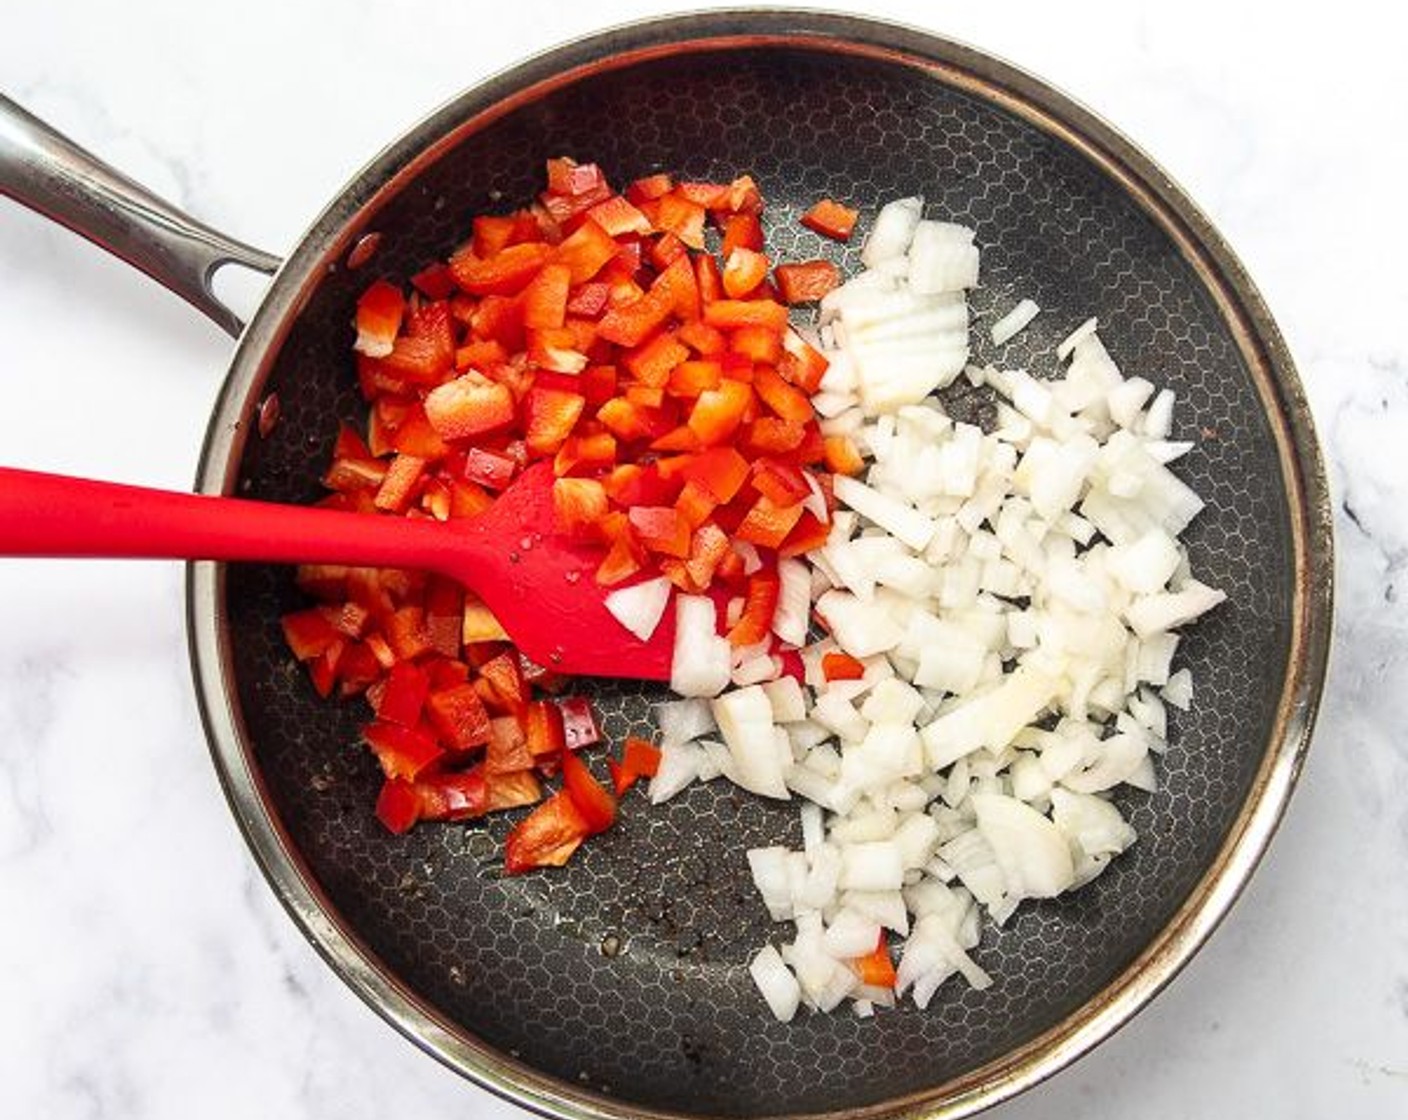 step 5 In the same skillet saute Onion (1) and Red Bell Pepper (1) for 5 minutes, or until softened. Remove for heat and set aside.